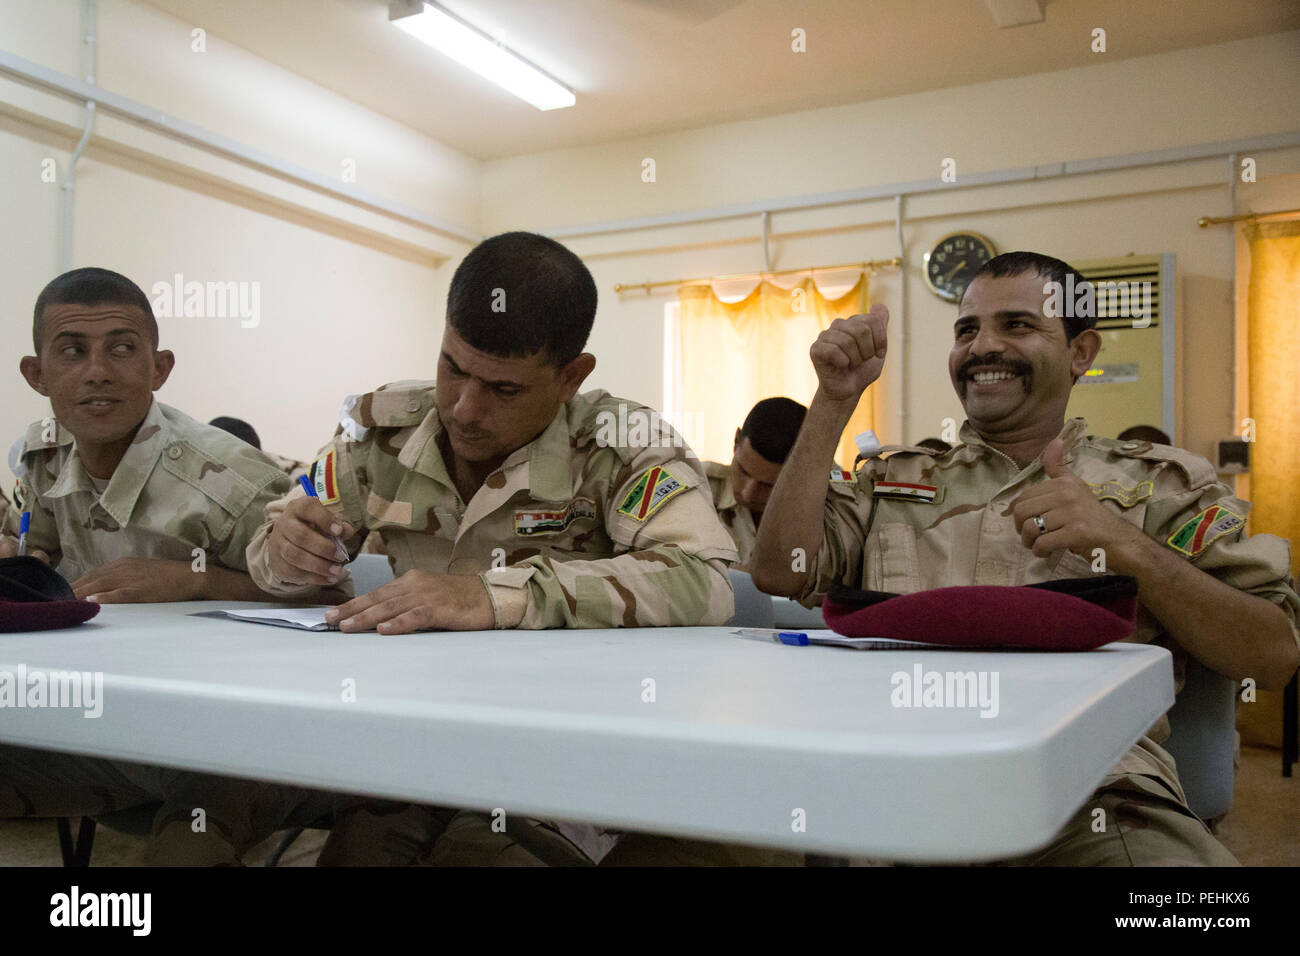 An Iraqi soldier attending the noncommissioned officer academy gives thumbs up after completing a map reading test at Camp Taji, Iraq, Aug. 23, 2015. Task Group Taji spearheaded the academy concept in order to teach Iraqi NCOs how to train and care for their soldiers in different situations. Through professional development with the Iraqi NCOs, Combined Joint Task Force – Operation Inherent Resolve is empowering the Iraqi security forces in the fight against the Islamic State of Iraq and the Levant. (U.S. Army photo by Spc. Paris Maxey/Released) Stock Photo